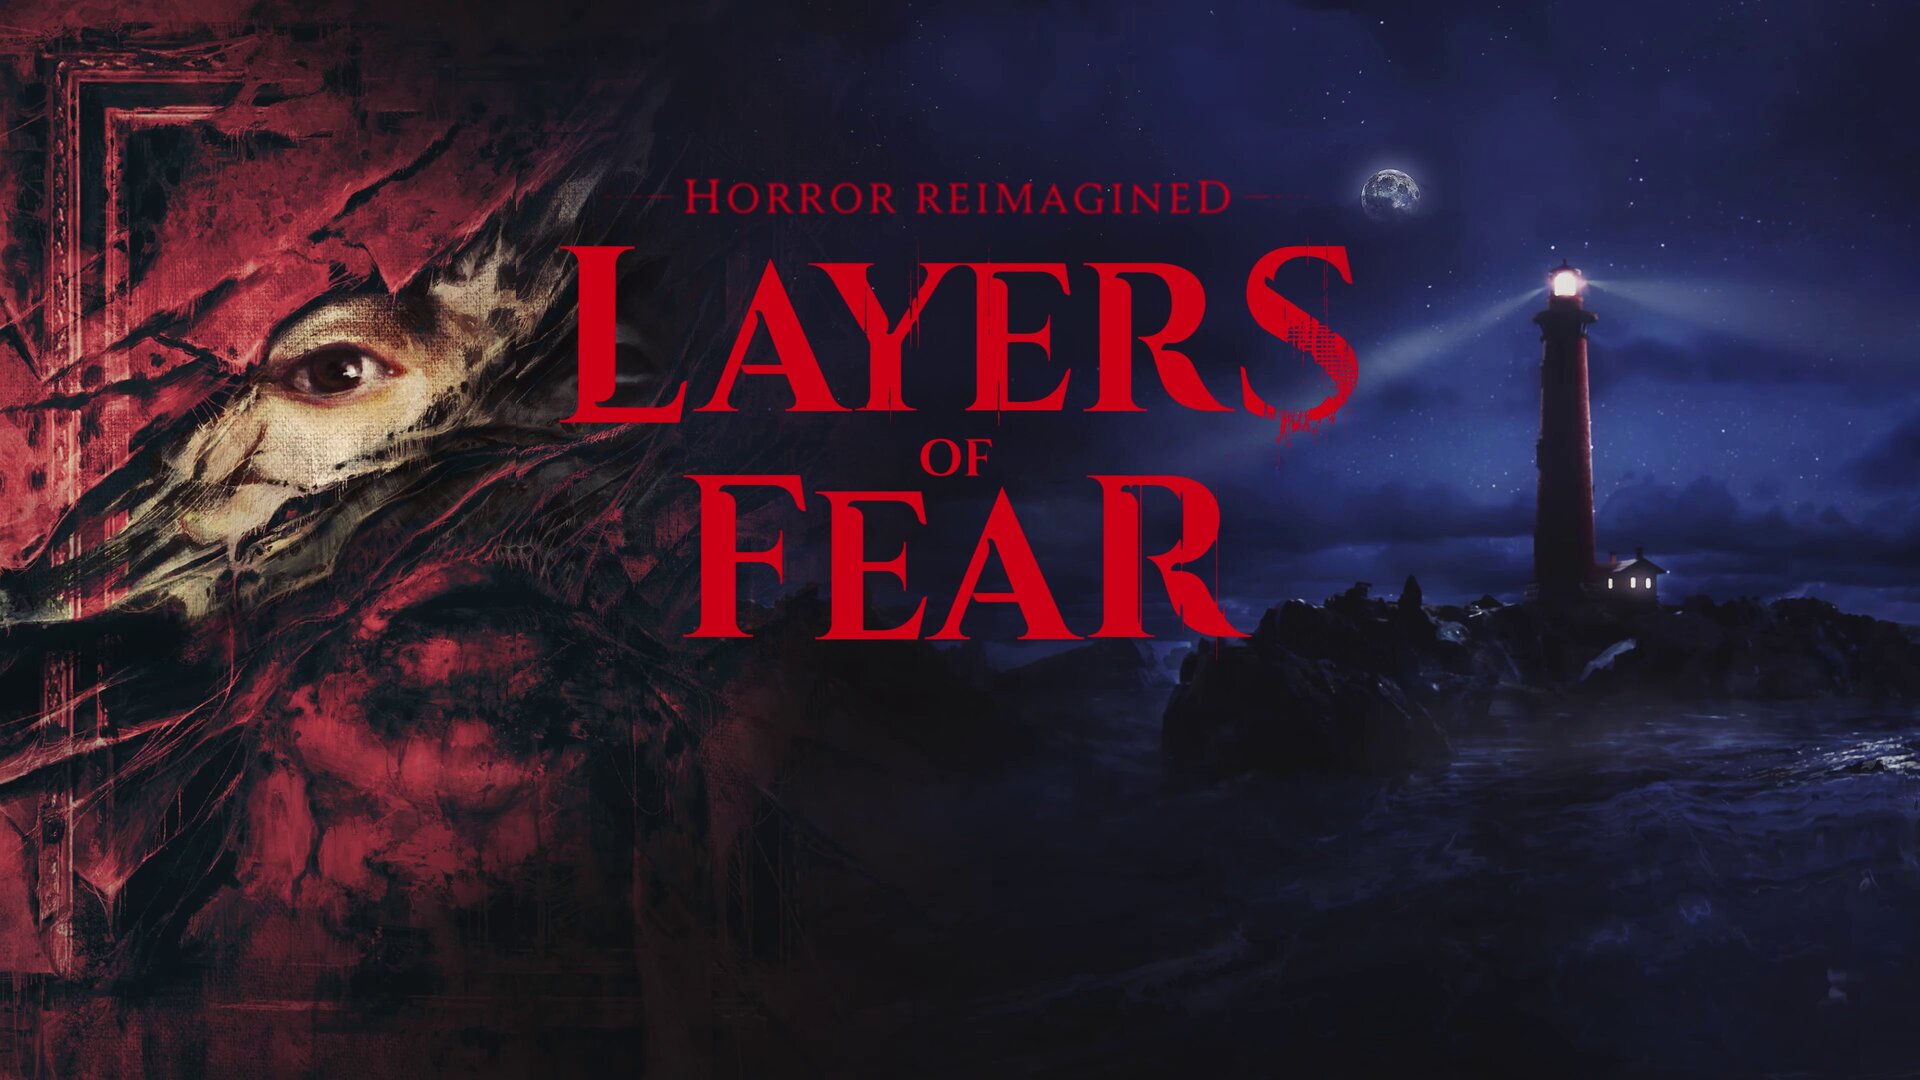 Layers of Fear demo